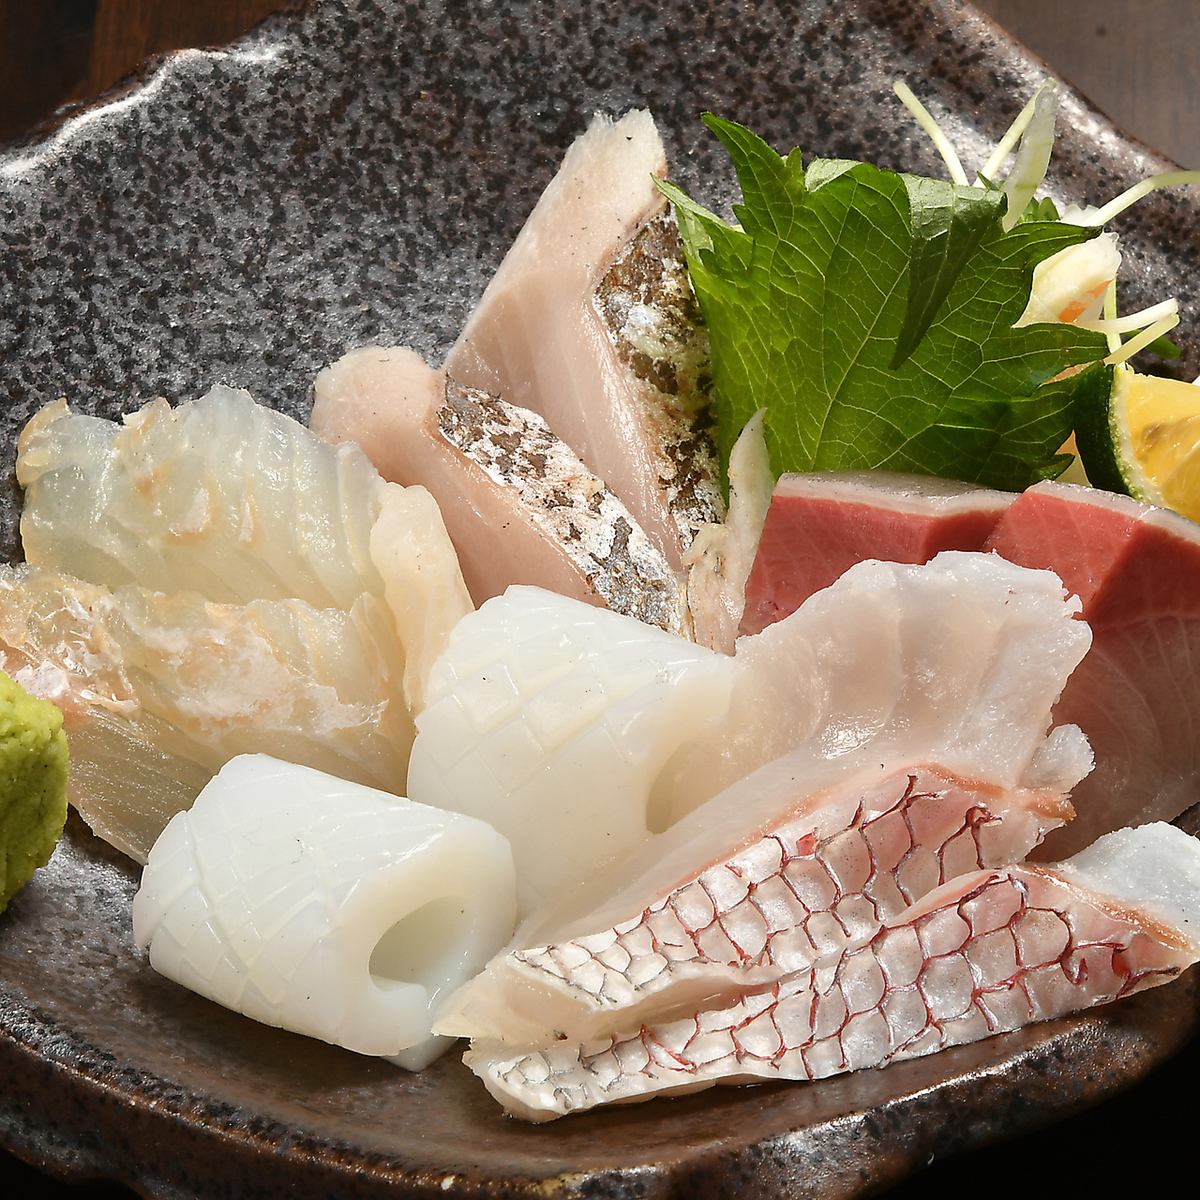 Carefully selected sashimi platter! Fresh fish procured daily and served on the same day